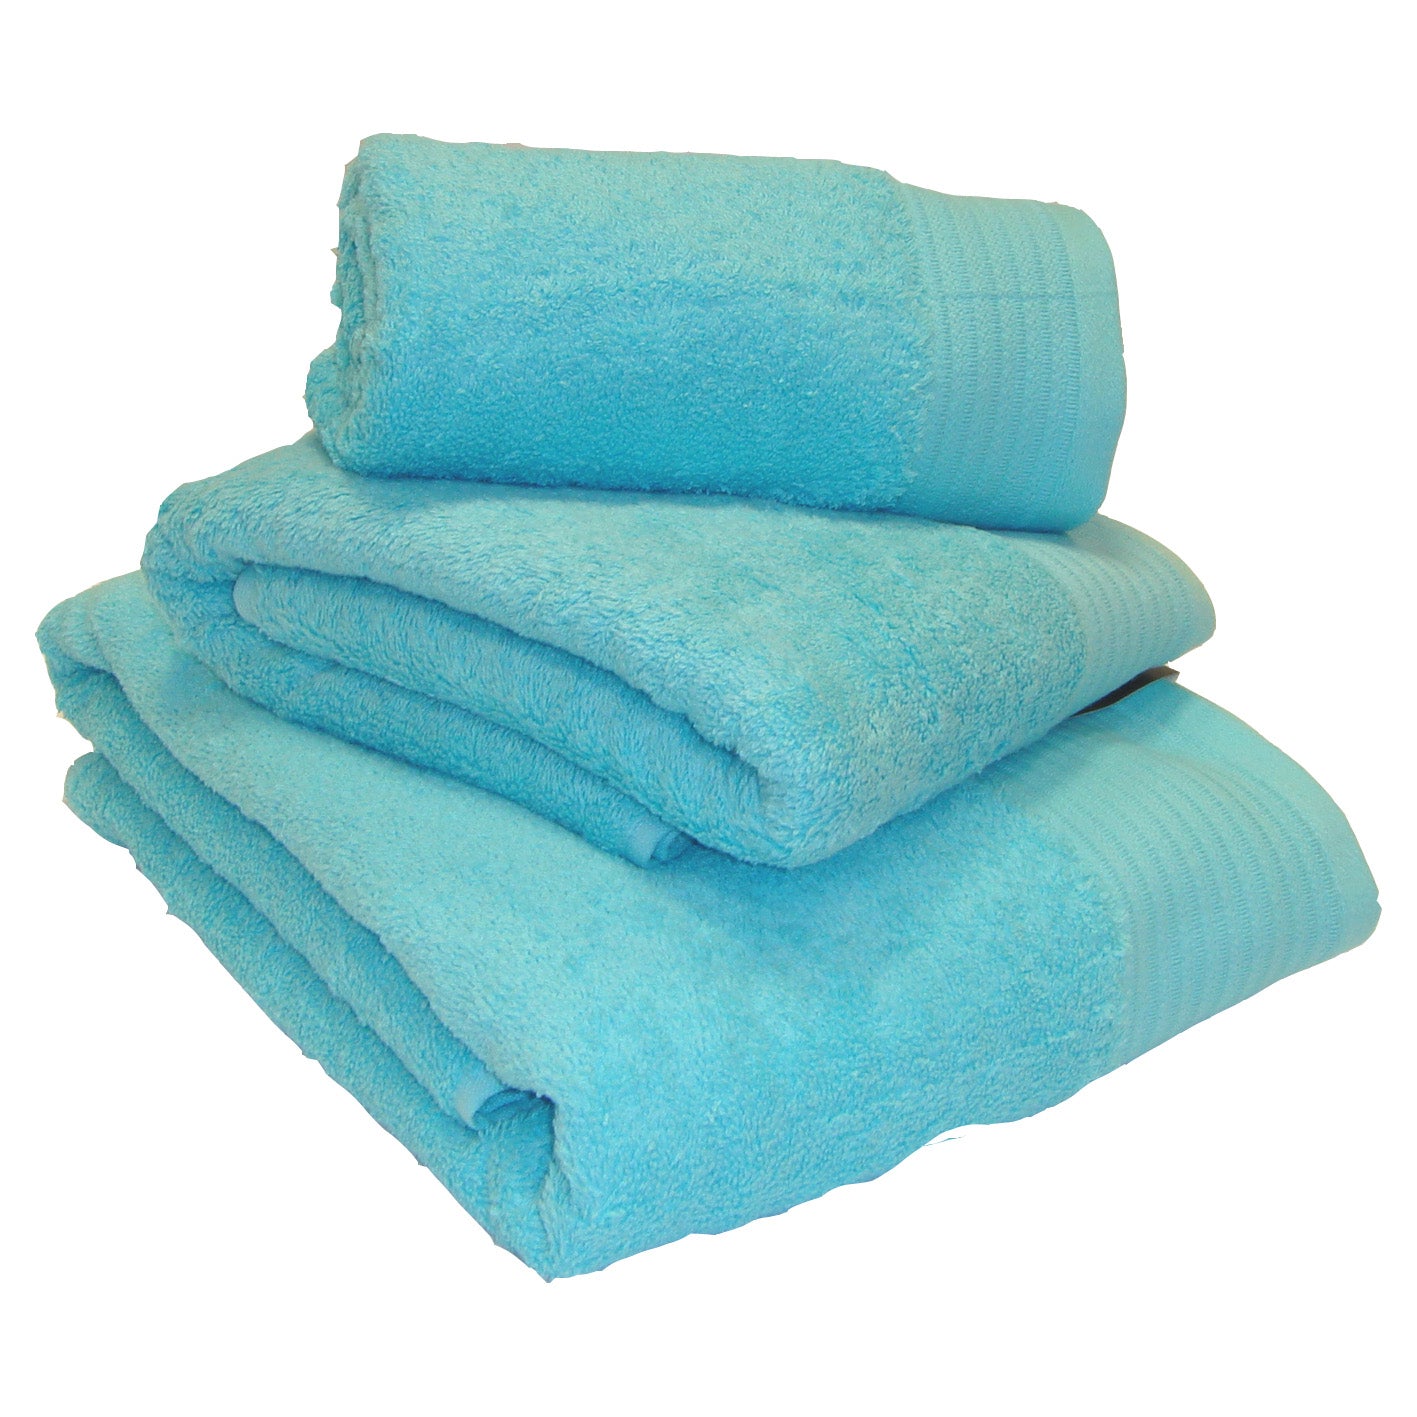 Chatsworth 100% Egyptian Cotton Bathroom Towels 600gsm Turquoise